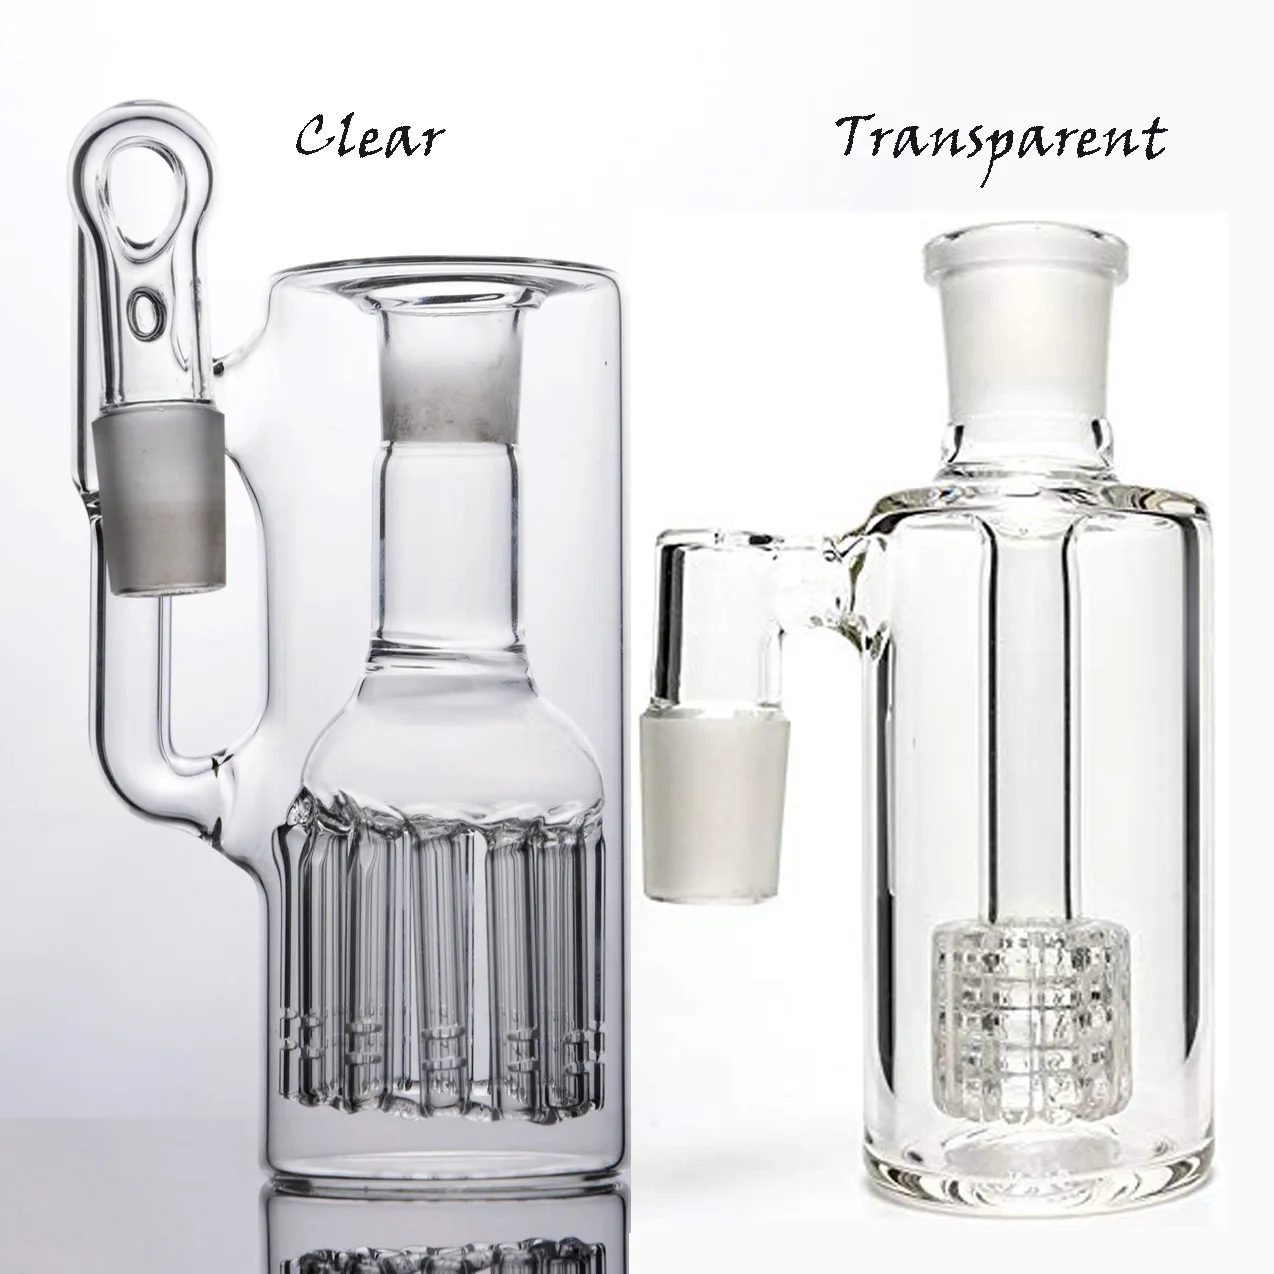 New Recycler Arm Tree Perc Ashcatcher 18mm joint for Hookahs Glass Water Bong Matrix Percolator Ash Catchers Oil Rigs Smoking Accessories